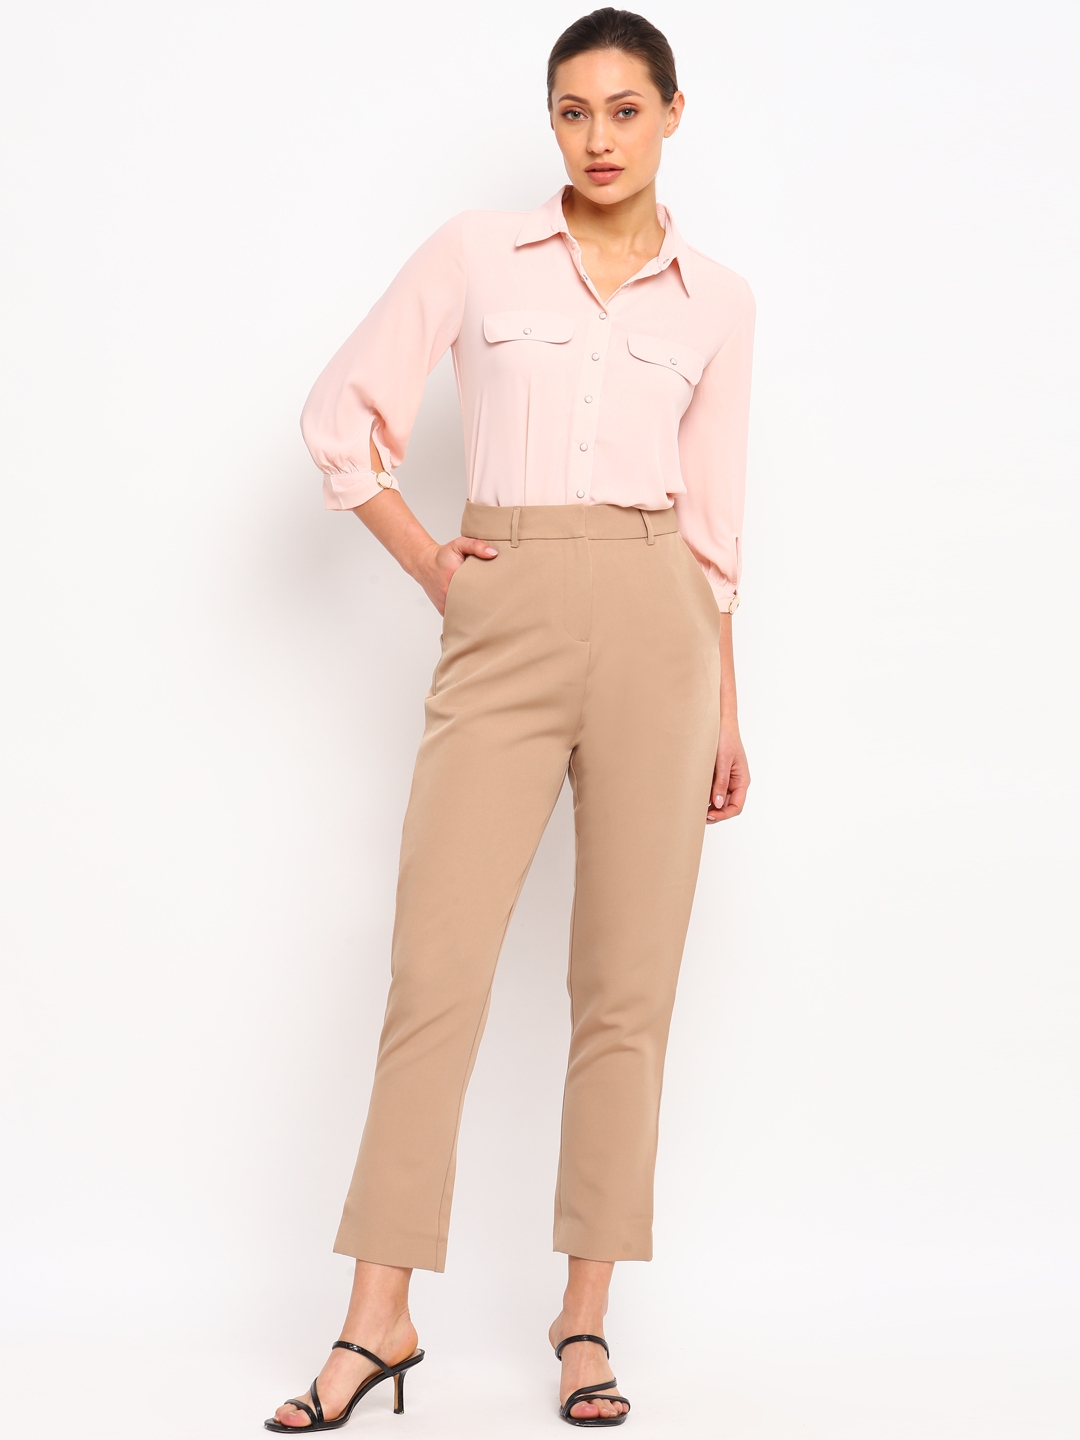 Women's Mid-rise Slim Straight Fit Side Split Trousers - A New Day™ : Target